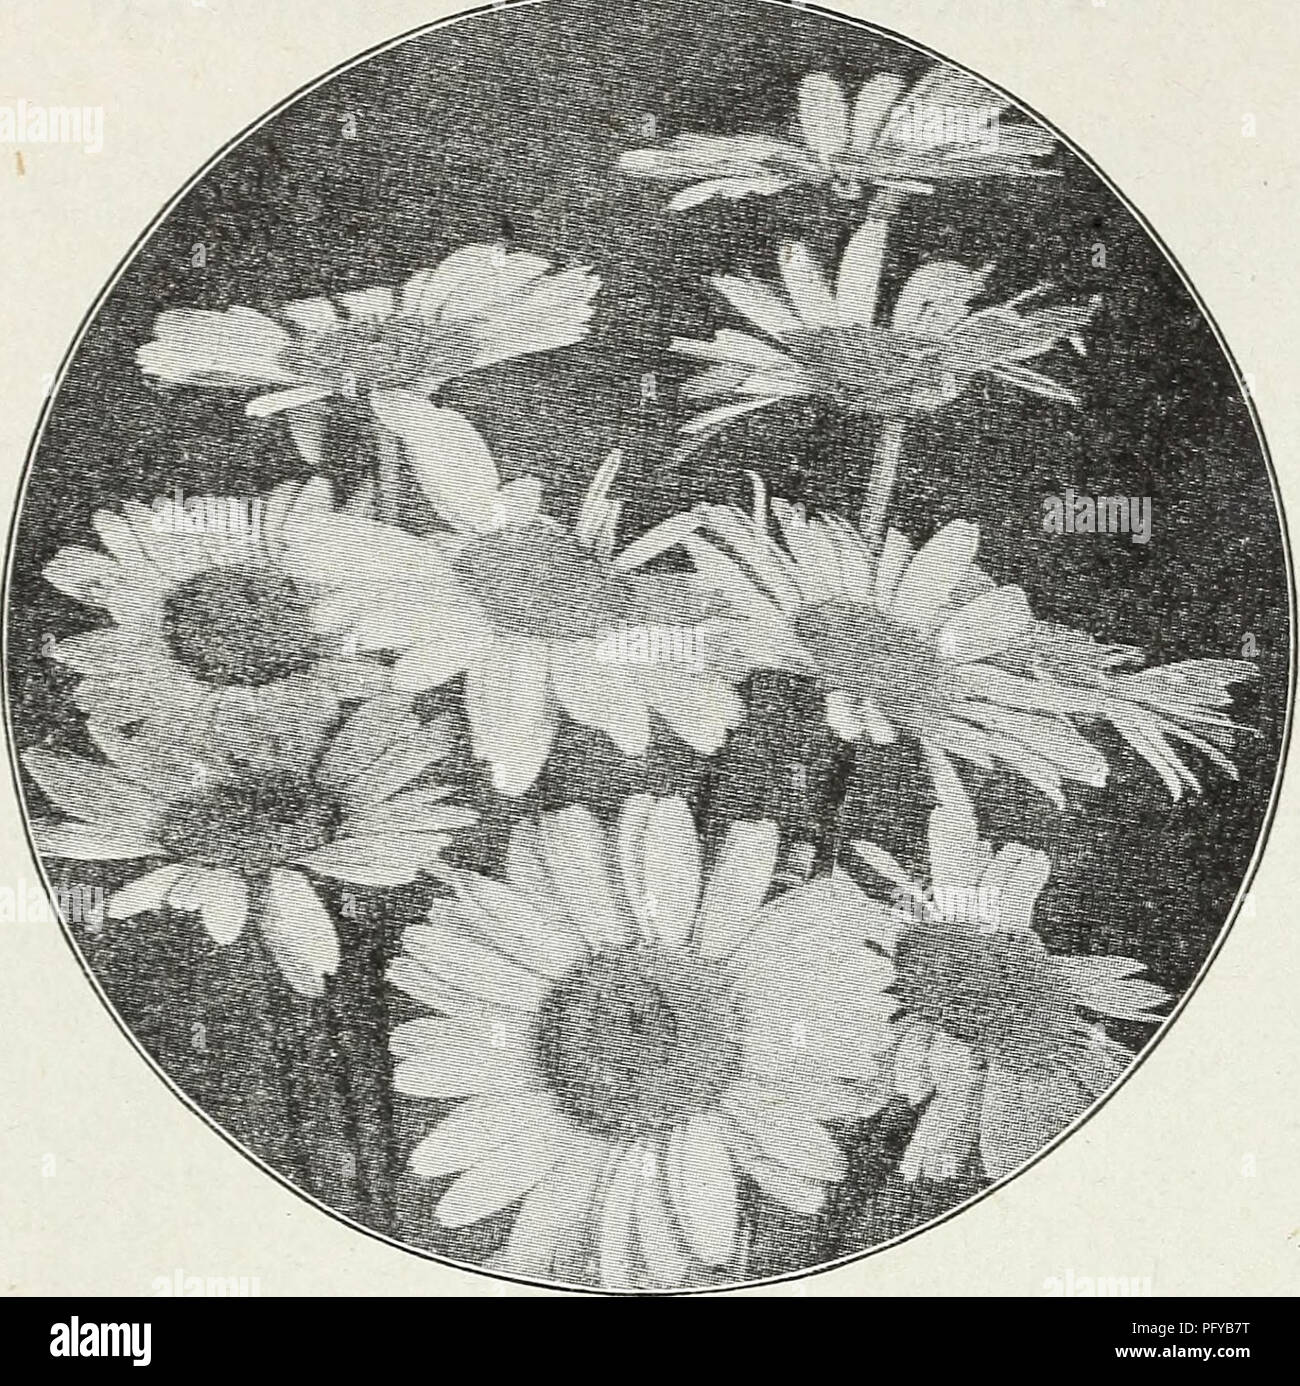 . Currie's farm and garden annual : spring 1930. Flowers Seeds Catalogs; Bulbs (Plants) Seeds Catalogs; Vegetables Seeds Catalogs; Nurseries (Horticulture) Catalogs; Plants, Ornamental Catalogs; Gardening Equipment and supplies Catalogs. Anthemis ANCHUSA ITALICA Dropmore Variety—An early and effective border plant, bearing an abundance of rich gentian blue flowers, 4 feet. Price, each, 25c; per doz., $2.50. ANEMONE JAPONICA (Japanese Windflower) Valuable for cut flowers, blooming in fall. Alice—Large rosy-pink, lavender center. Queen Charlotte—Semi-double pink. Pulsatilla—Fine cut foliage, flo Stock Photo